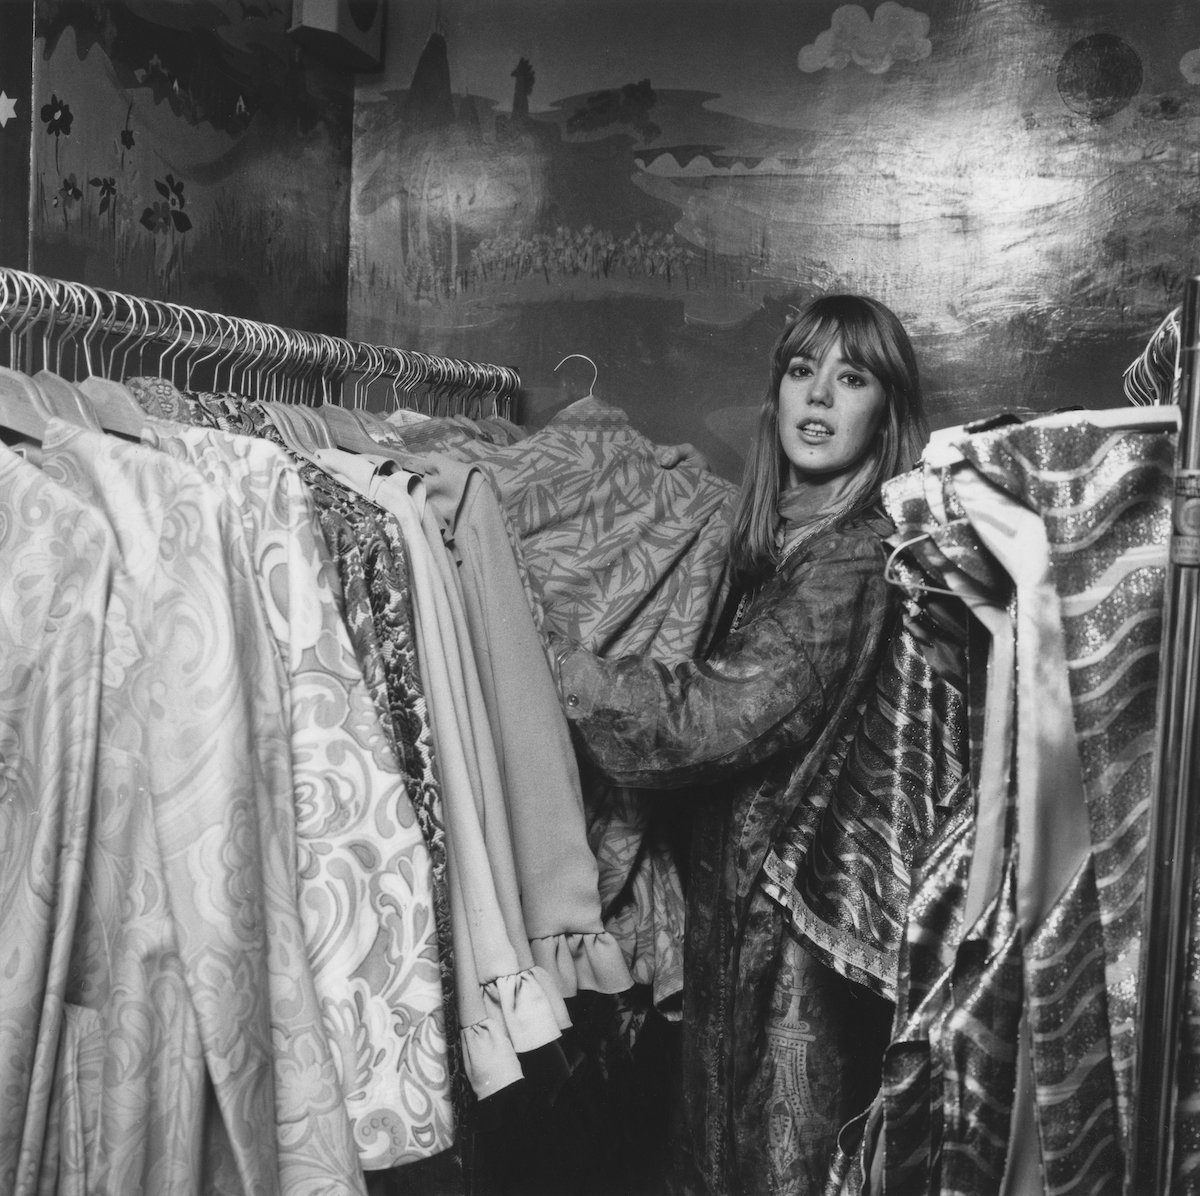 Jenny Boyd, who was married to Fleetwood Mac founder Mick Fleetwood and inspired the Donovan song "Jennifer Juniper," pulls a shirt from a rack of clothing.